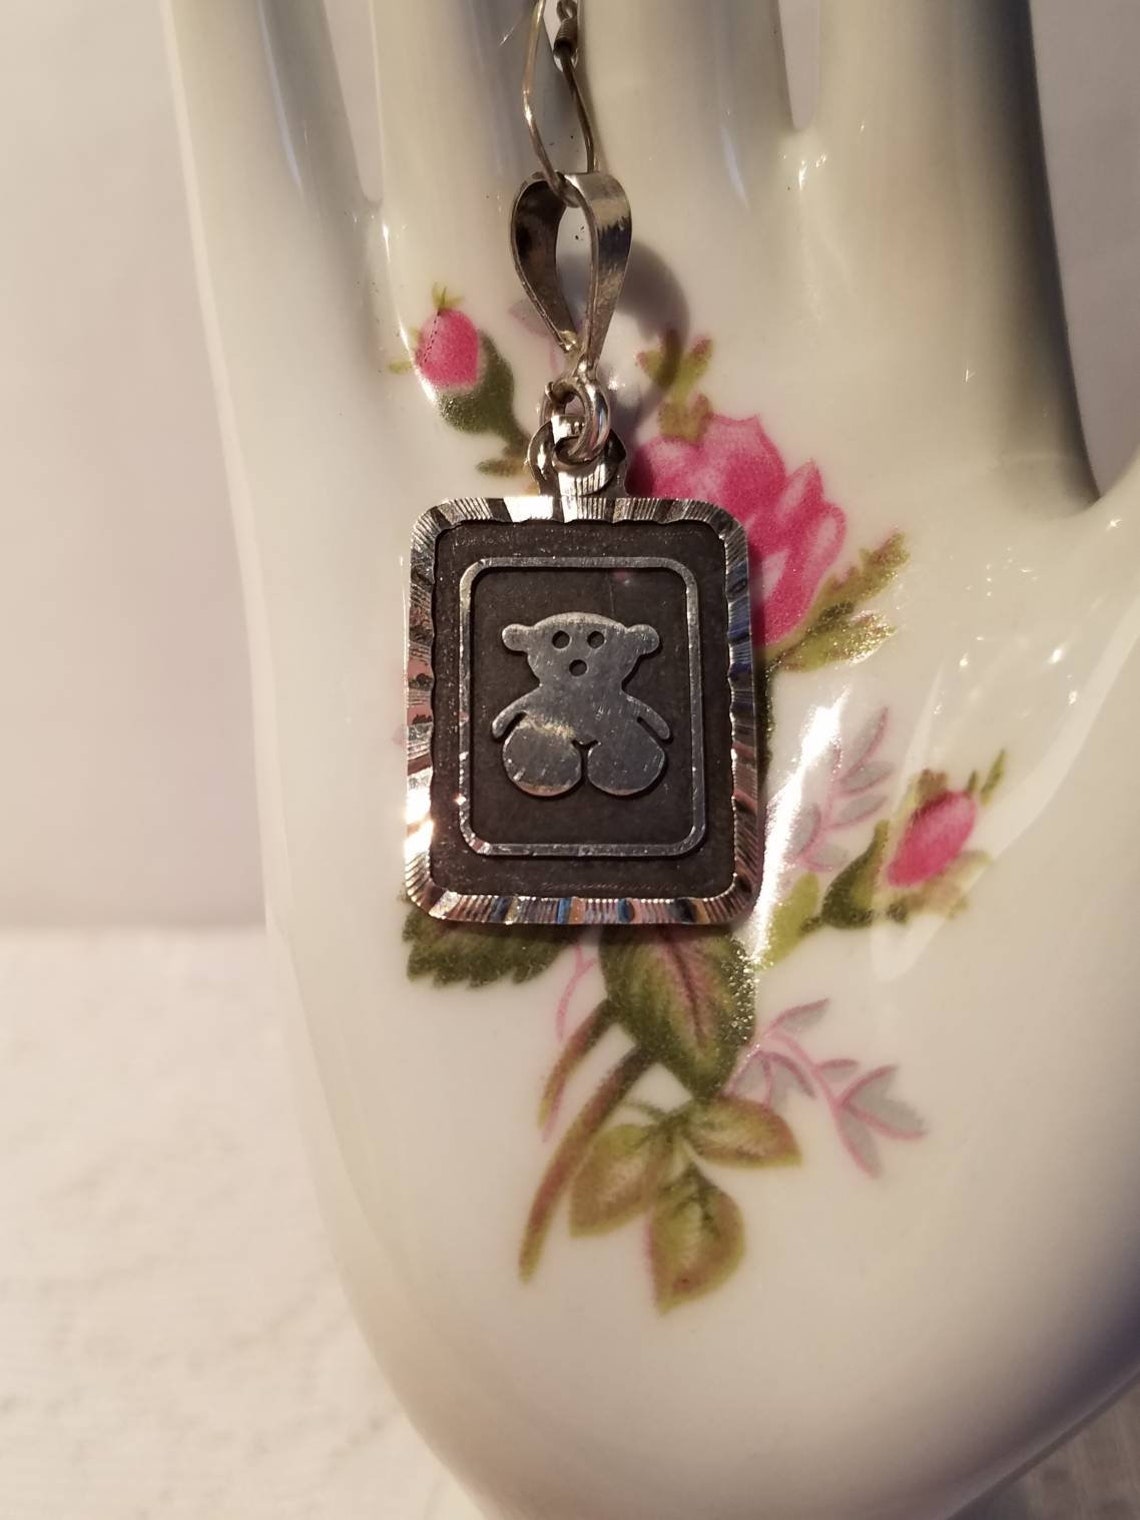 Taxco Mexico TV-02 950 Silver Square Bear Necklace Pendant - Etsy UK